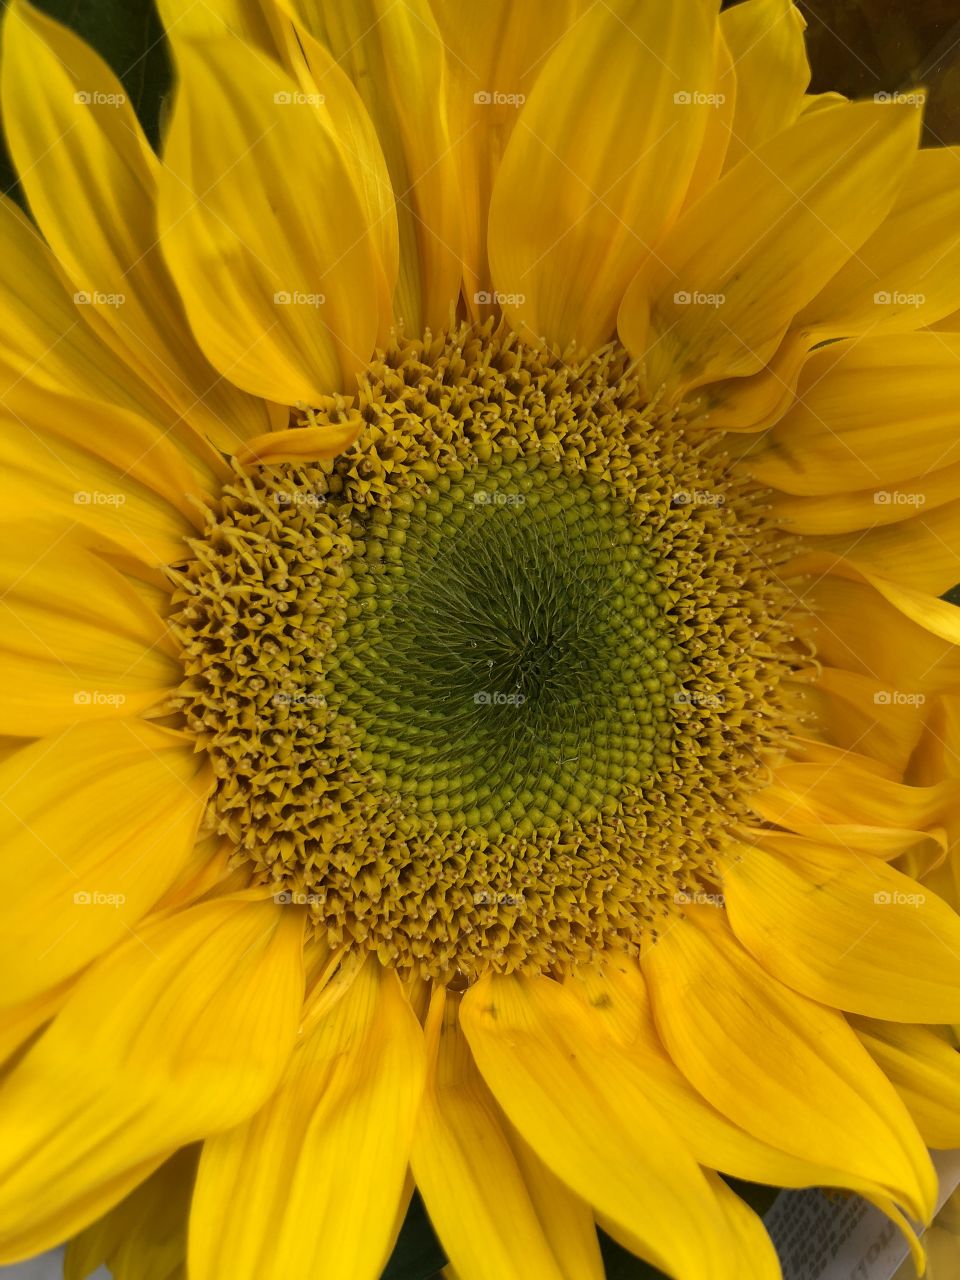 Face of bright yellow Sunflower close-up, macro, with focus on the seeded center surrounded by petals